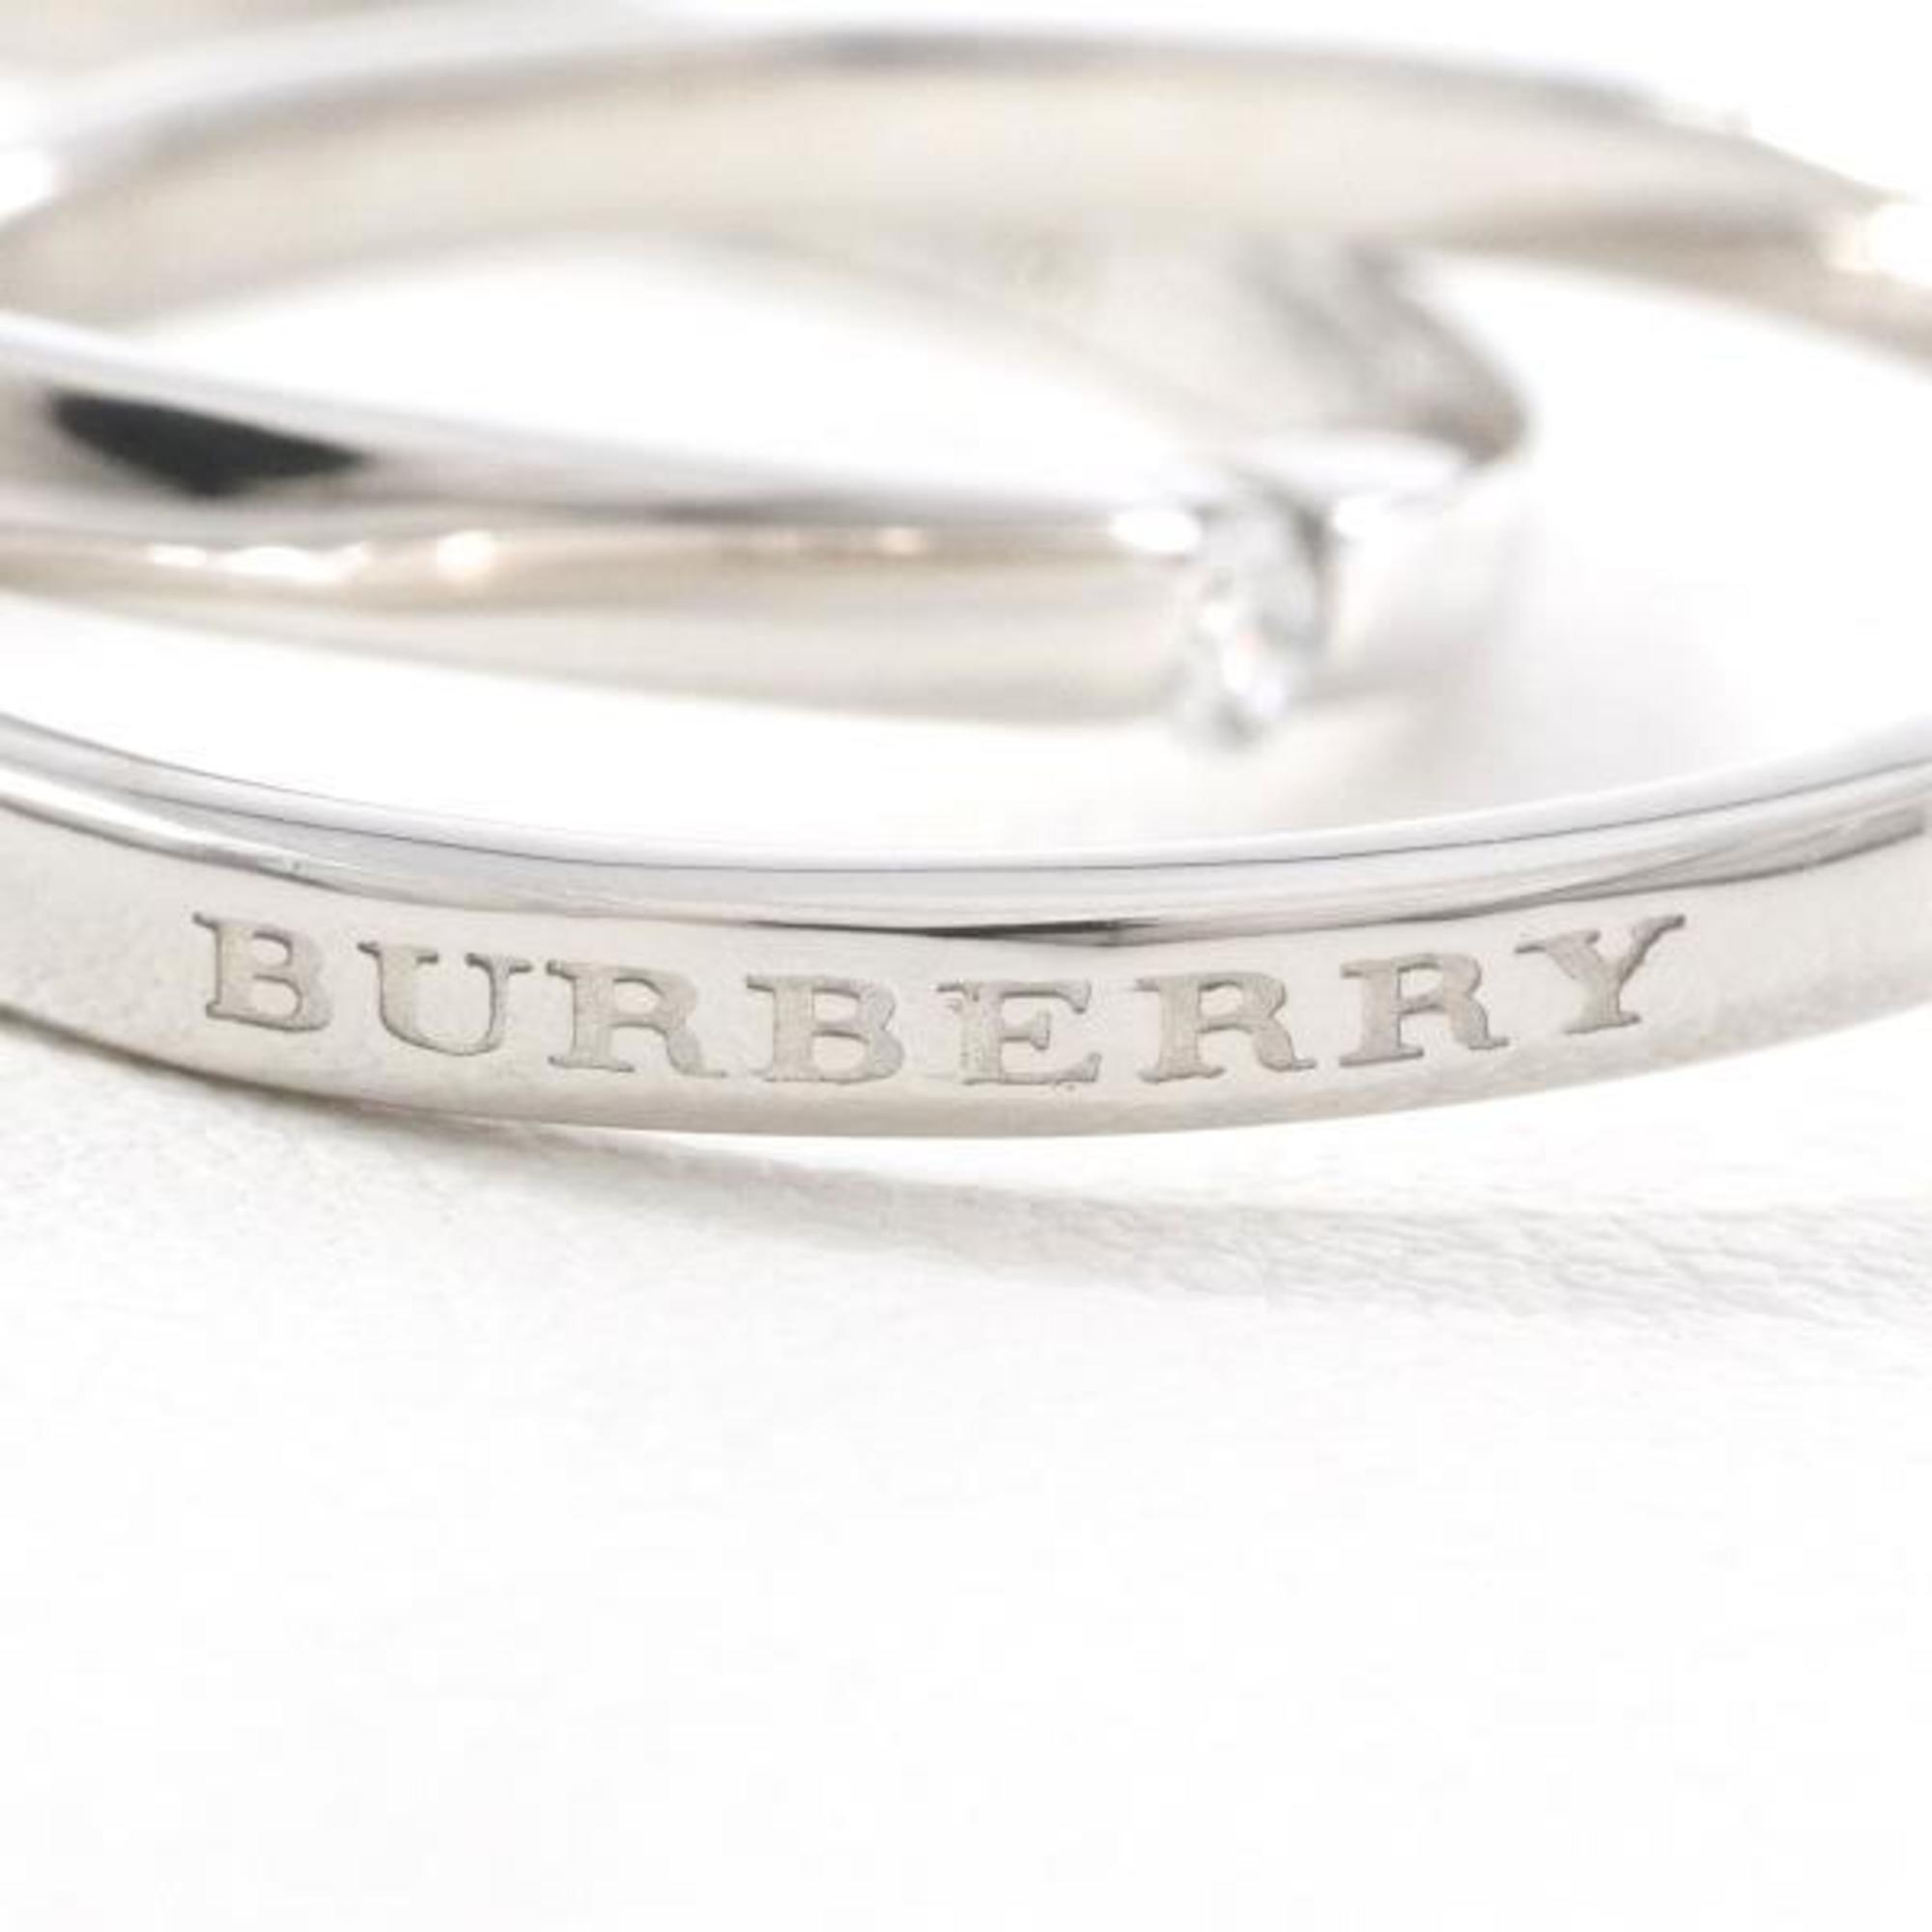 Burberry PT900 Ring No. 10 Diamond 0.02 Total Weight Approx. 4.5g Jewelry